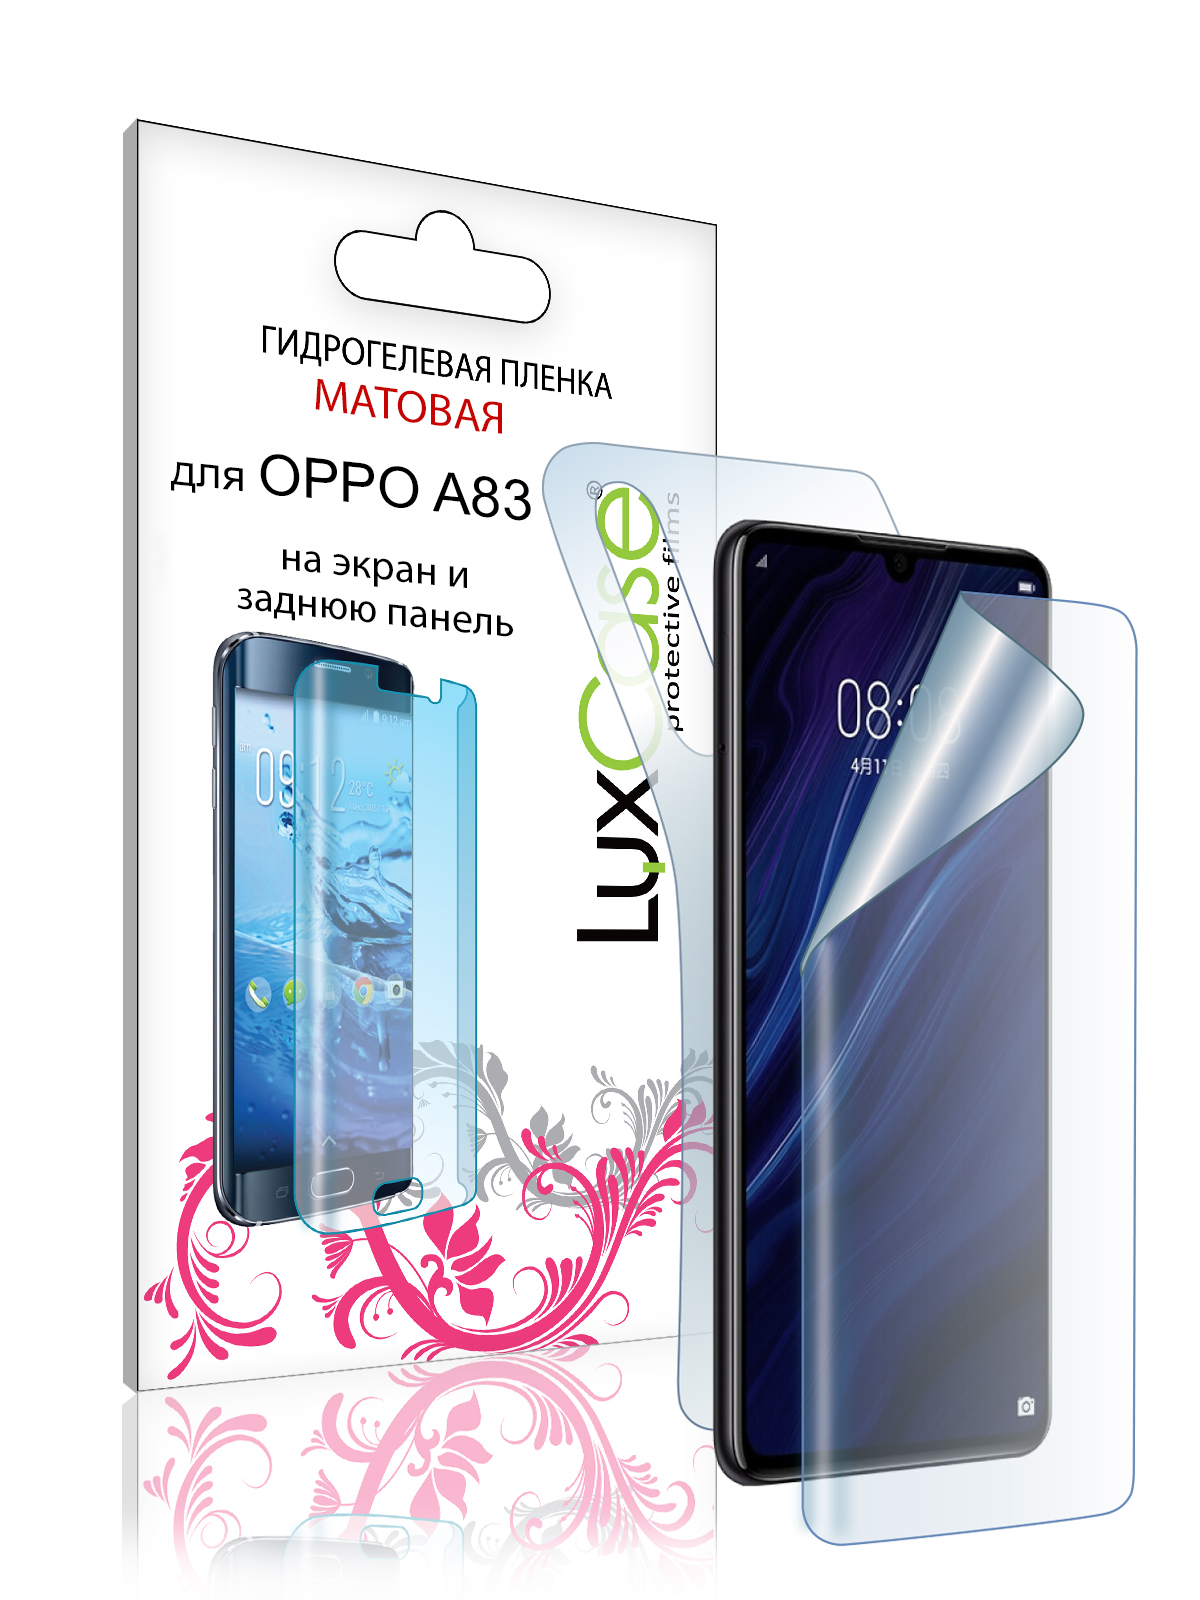 Гидрогелевая пленка LuxCase для Oppo A83 0.14mm Front and Back Transparent гидрогелевая пленка luxcase для tcl 305 0 14mm transparent front and back 90593